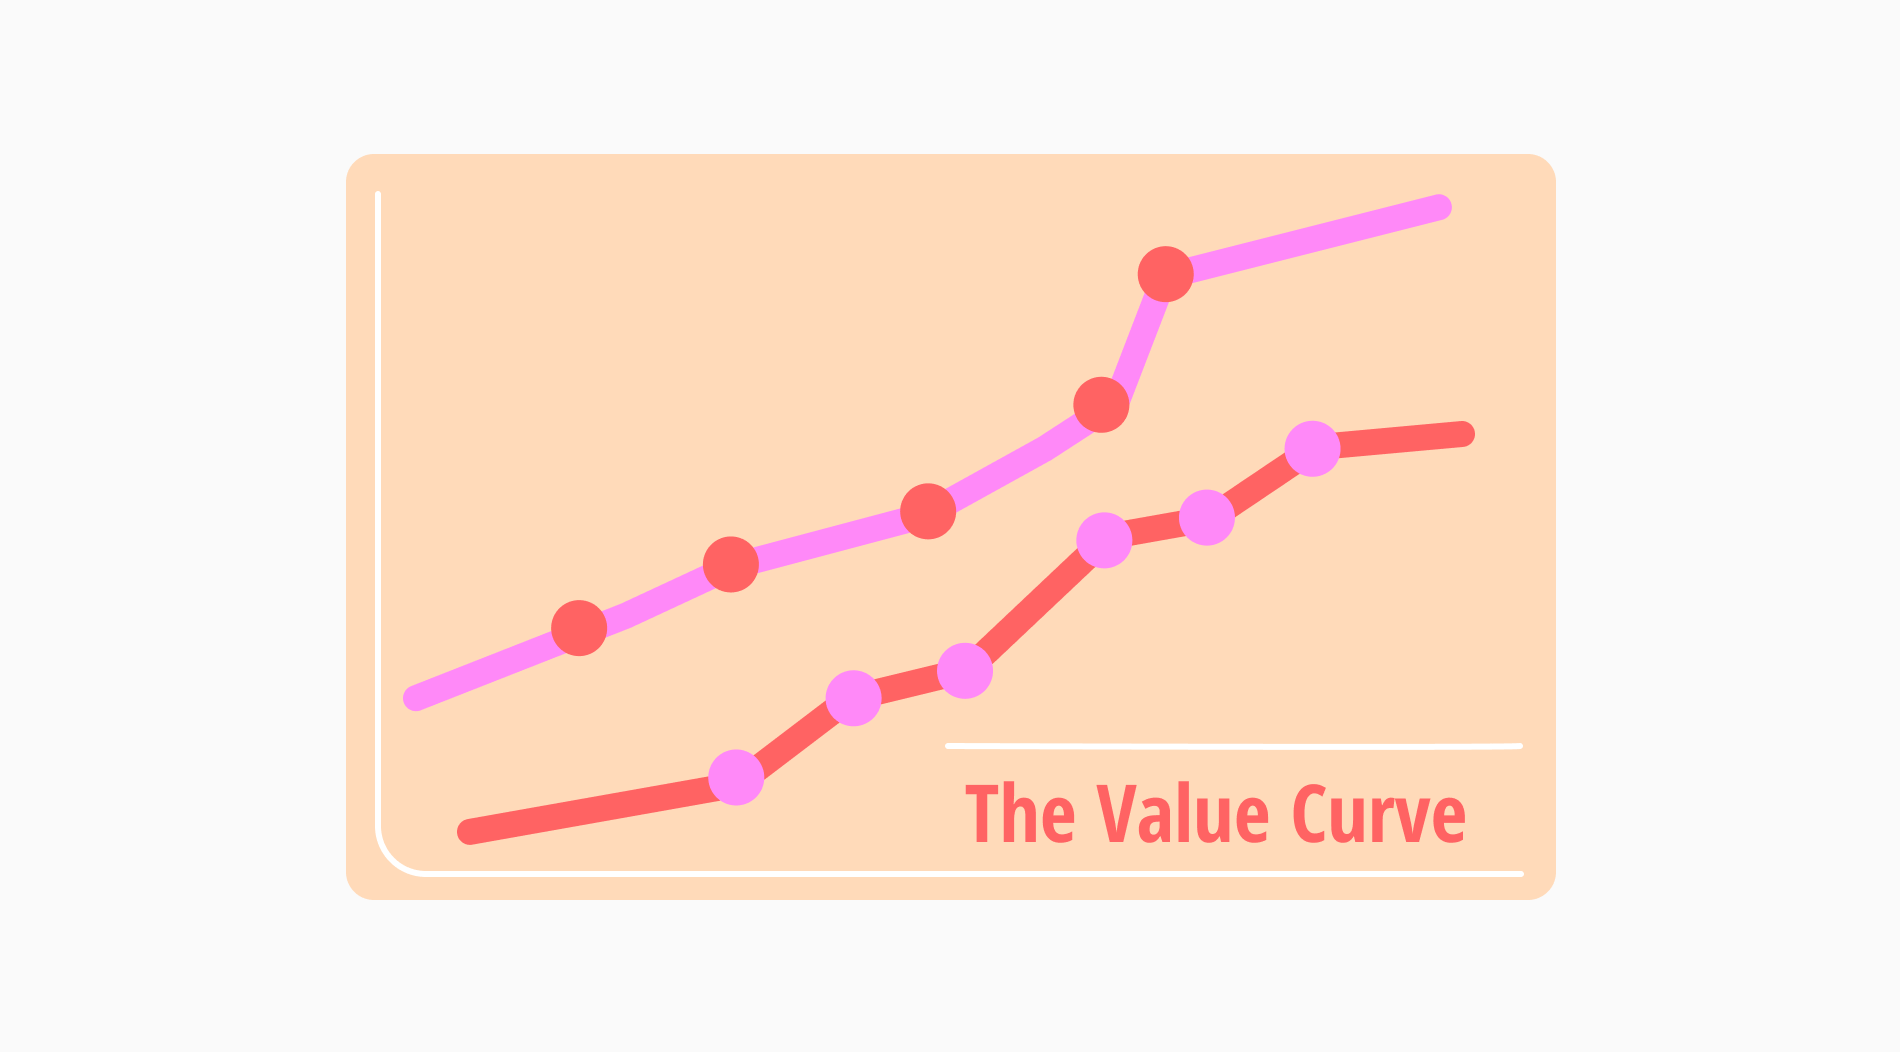 Your definitive guide to the value curve